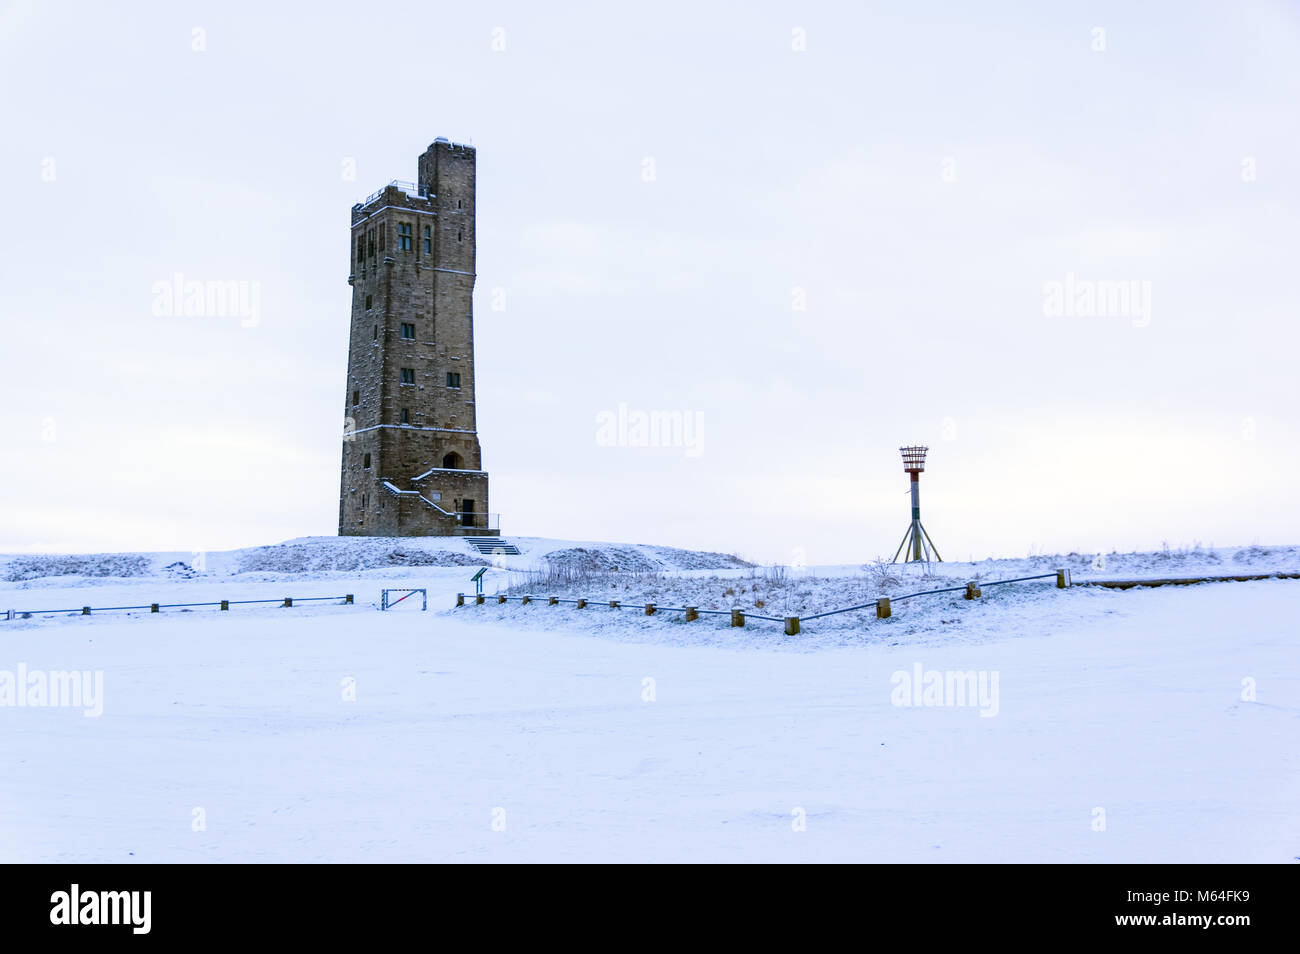 Victoria Jubilee Tower on Castle Hill, Huddersfield  in the freezing snow Stock Photo